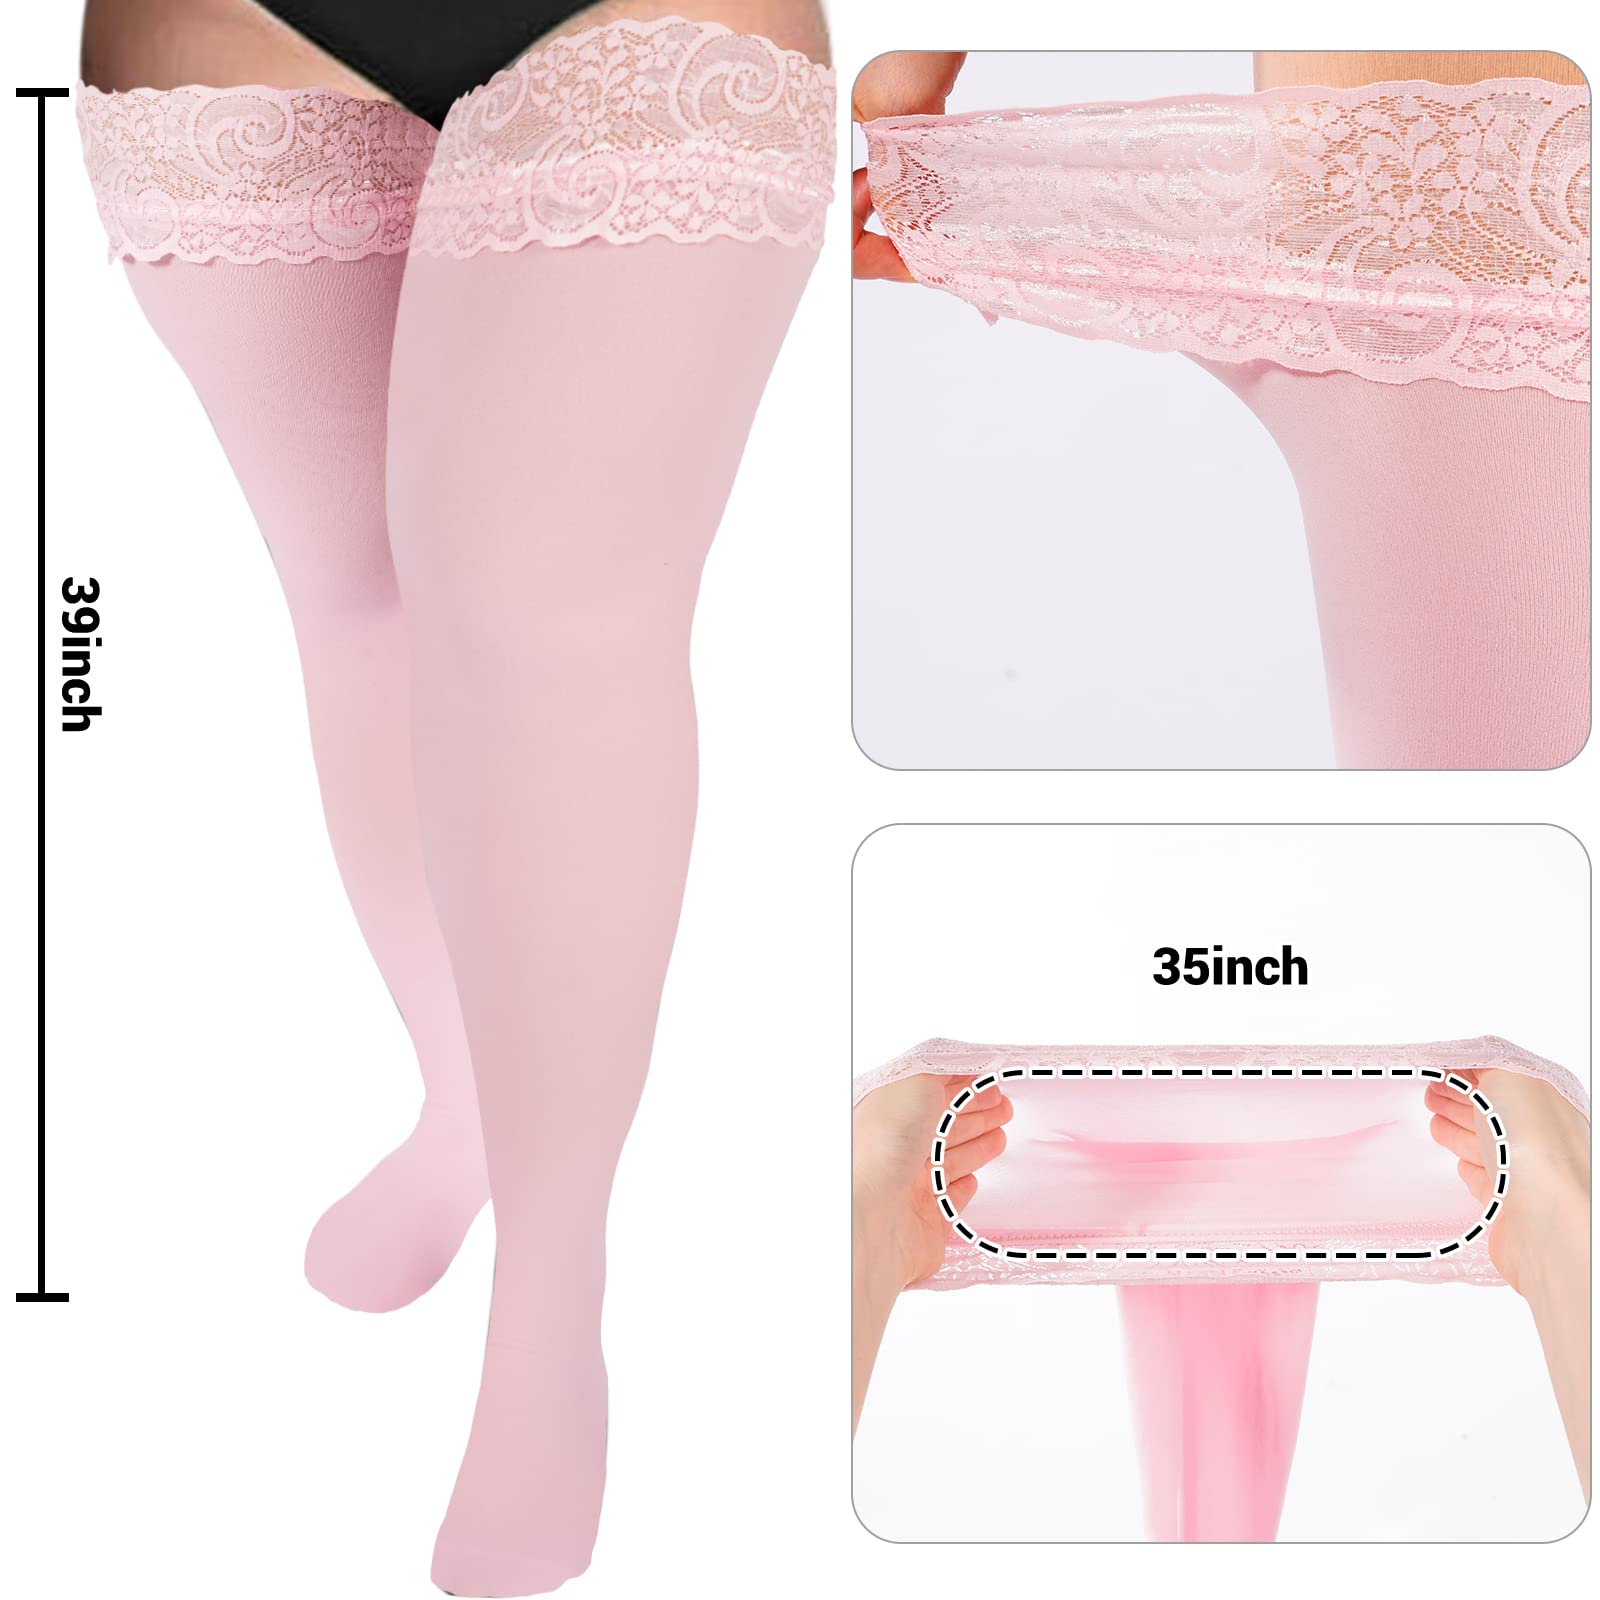 https://moonwoodwear.com/cdn/shop/files/55D-Semi-Sheer-Silicone-Lace-Stay-Up-Thigh-Highs-Pantyhose-Light-Pink2.jpg?v=1683602546